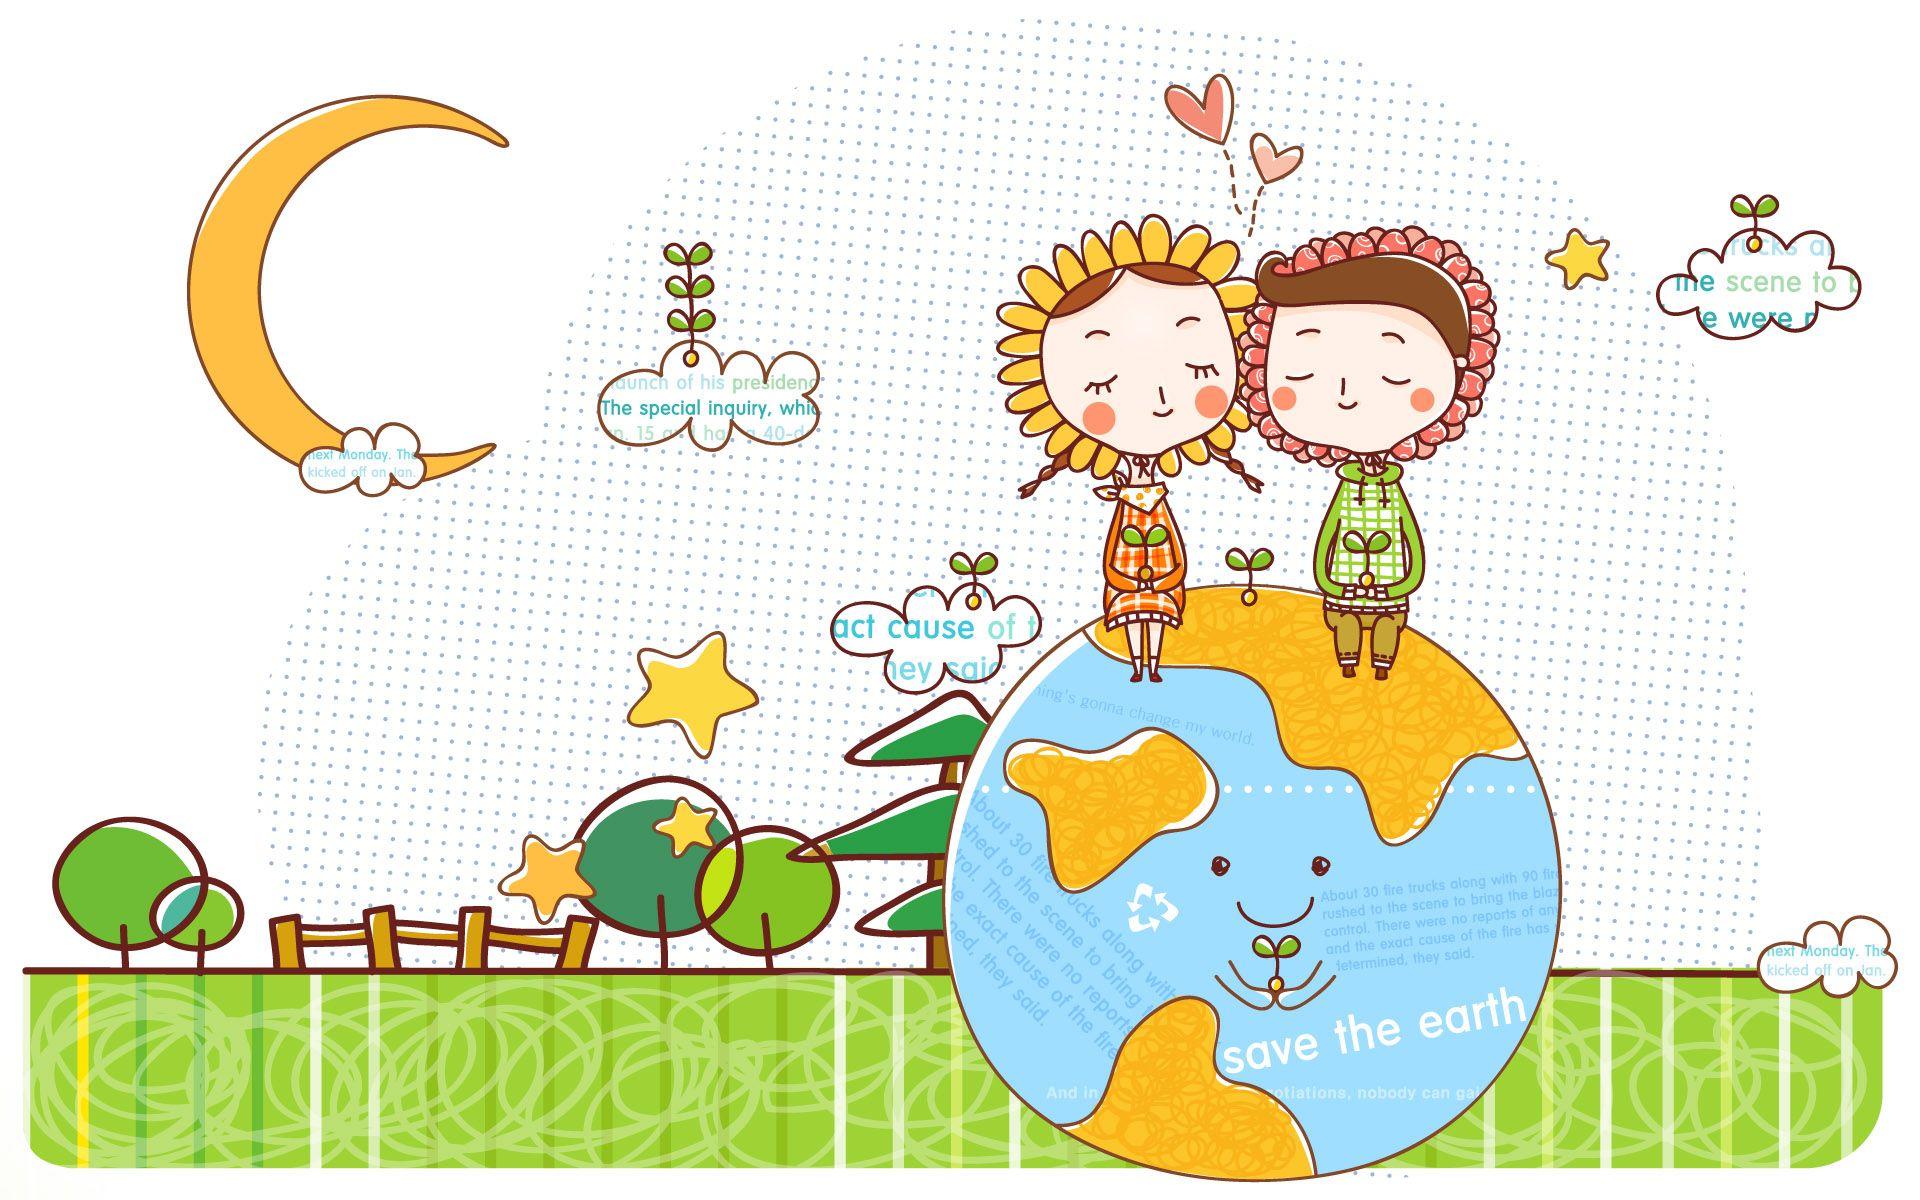 Earth day 2012 save the earth Wallpaper Wallpaper 97182